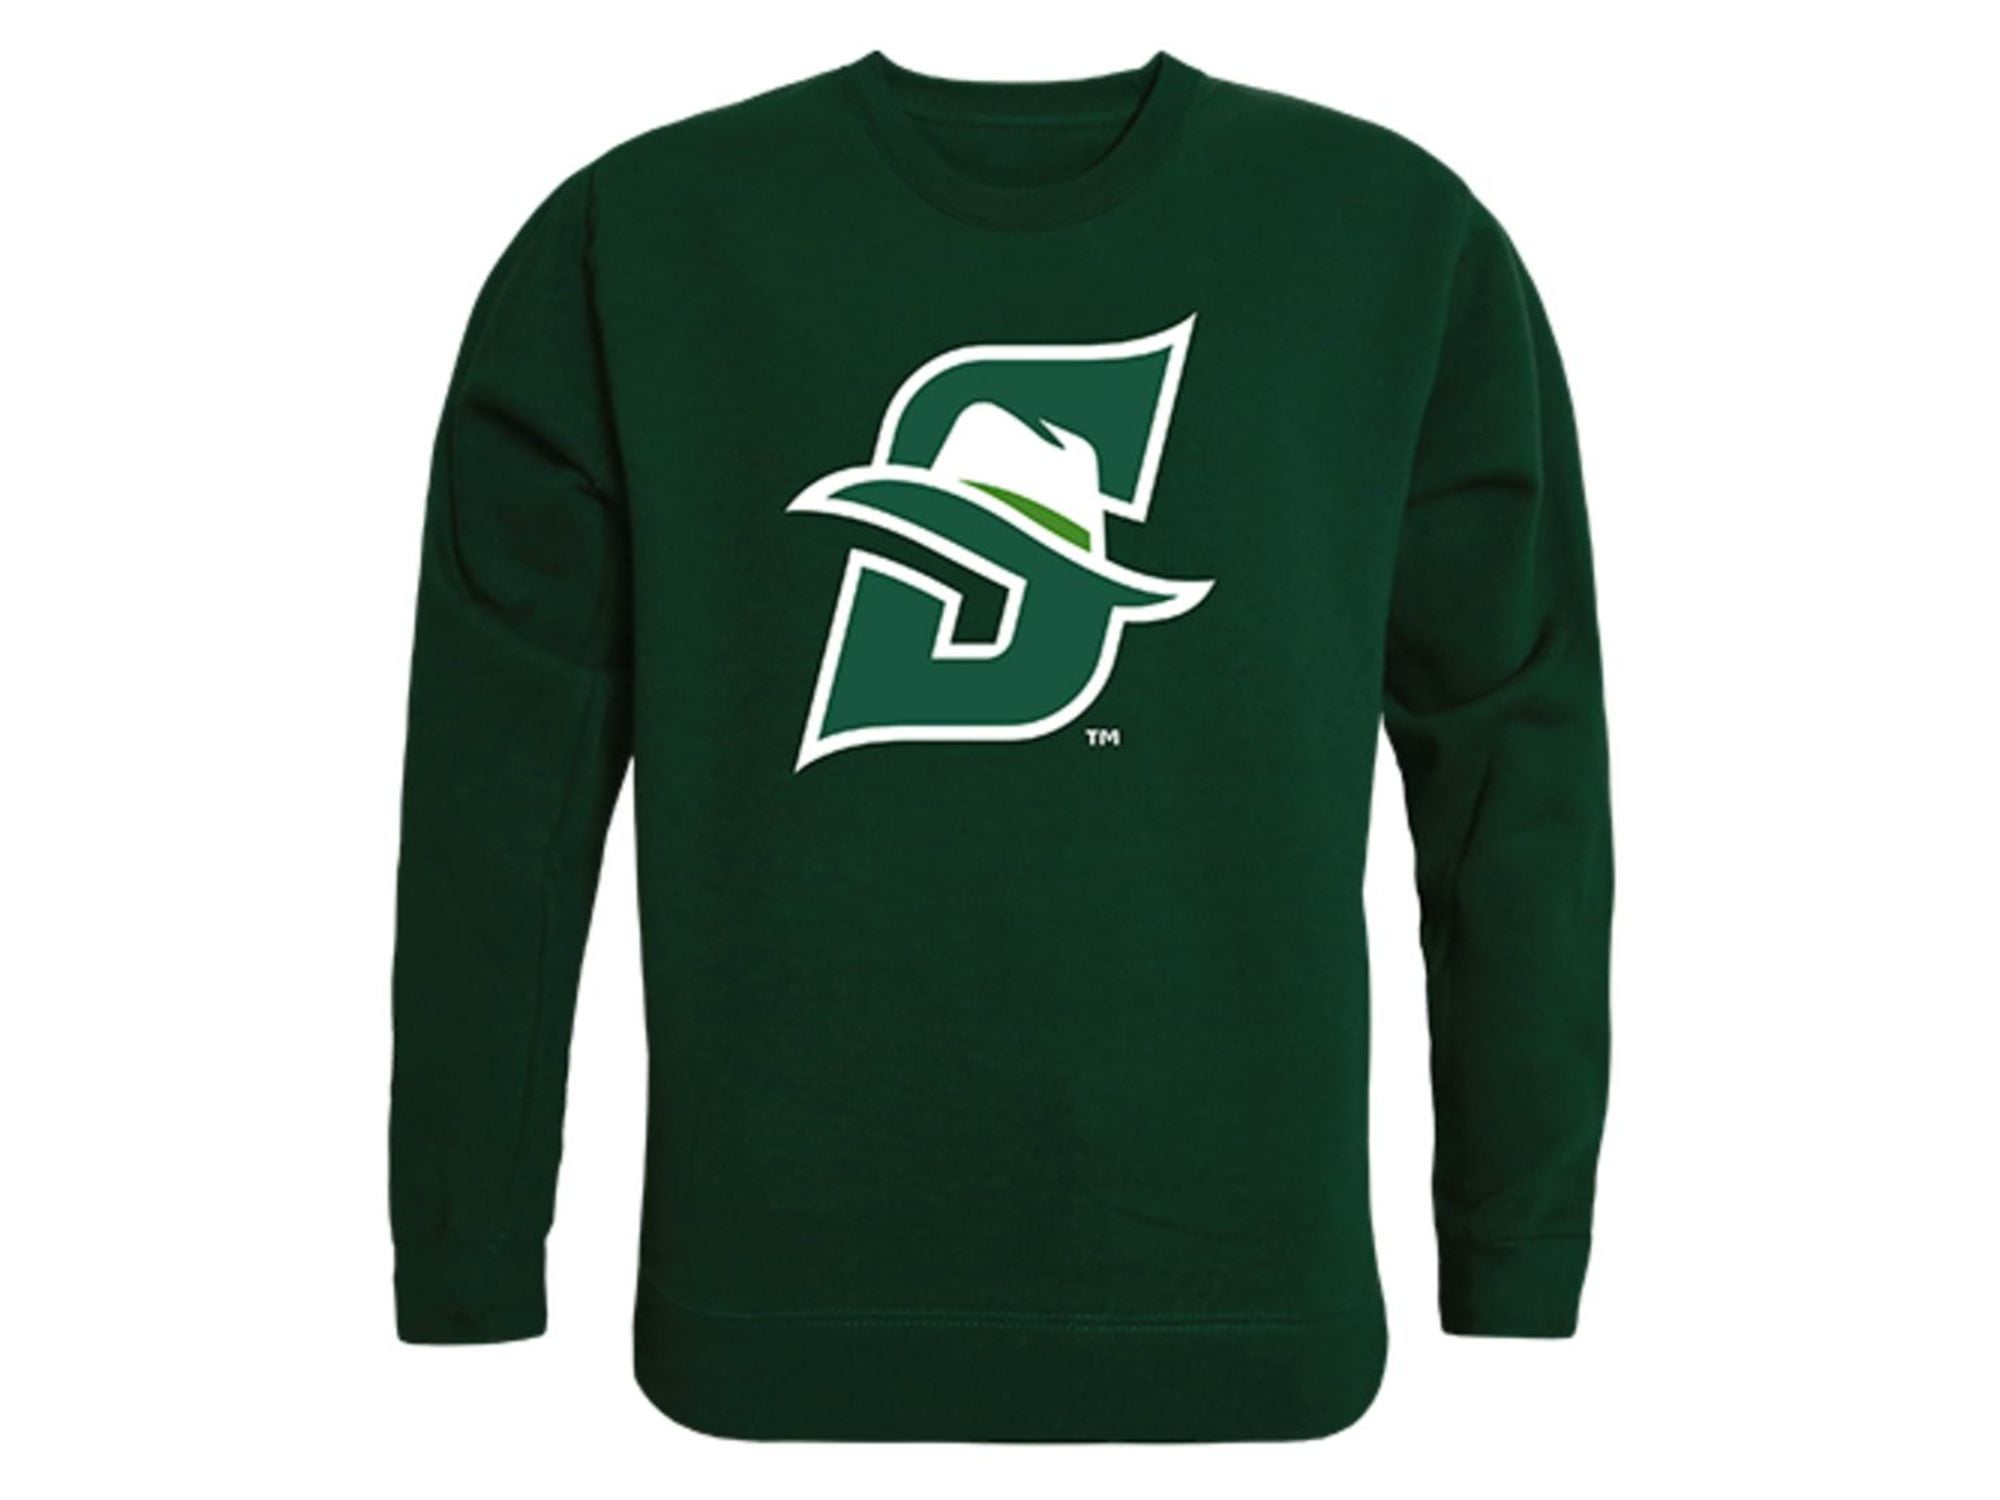 Green crewneck forest Sanctions Policy